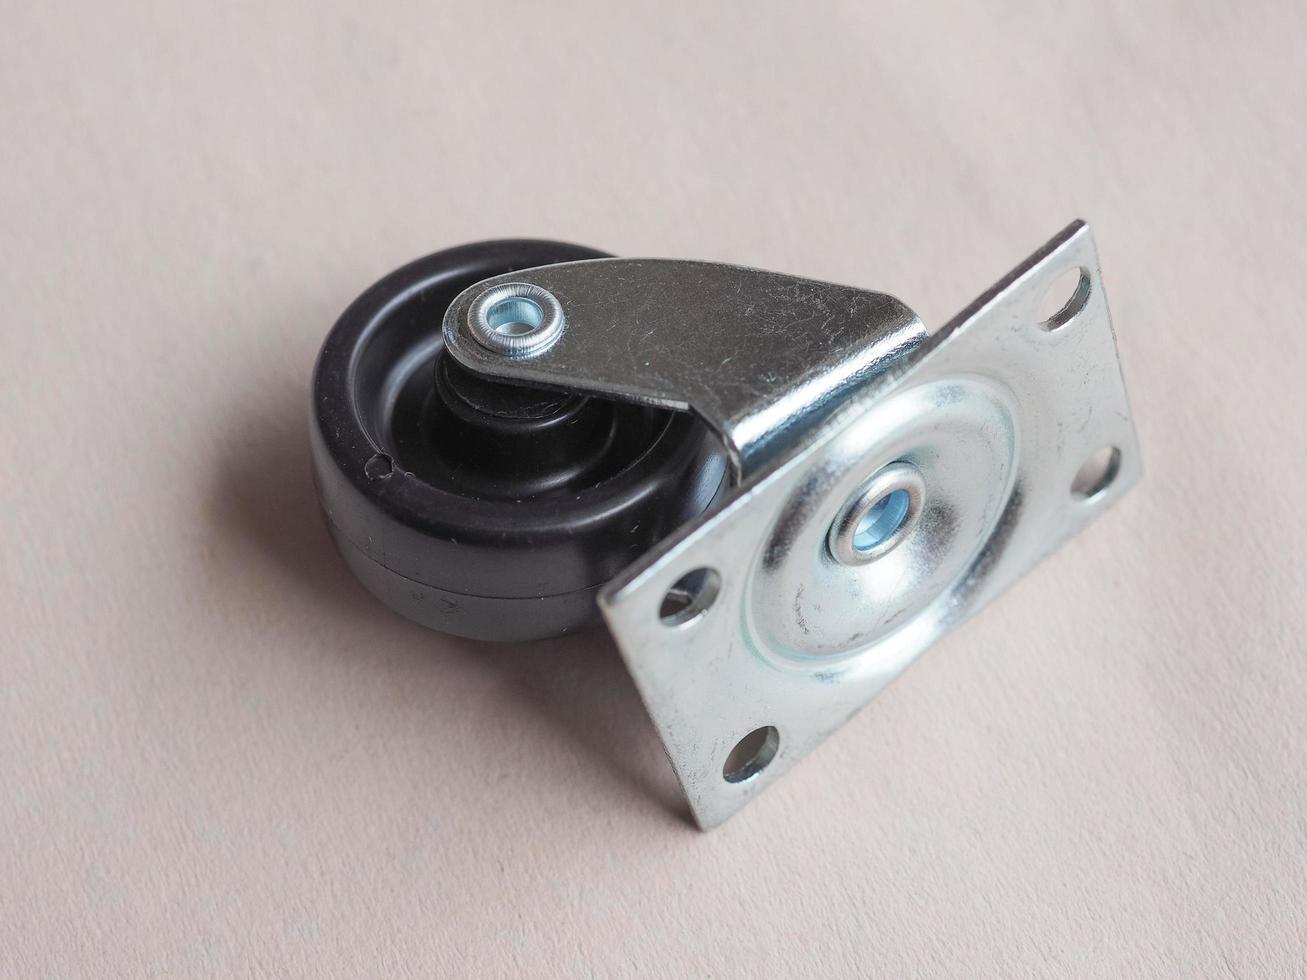 Caster wheels device photo